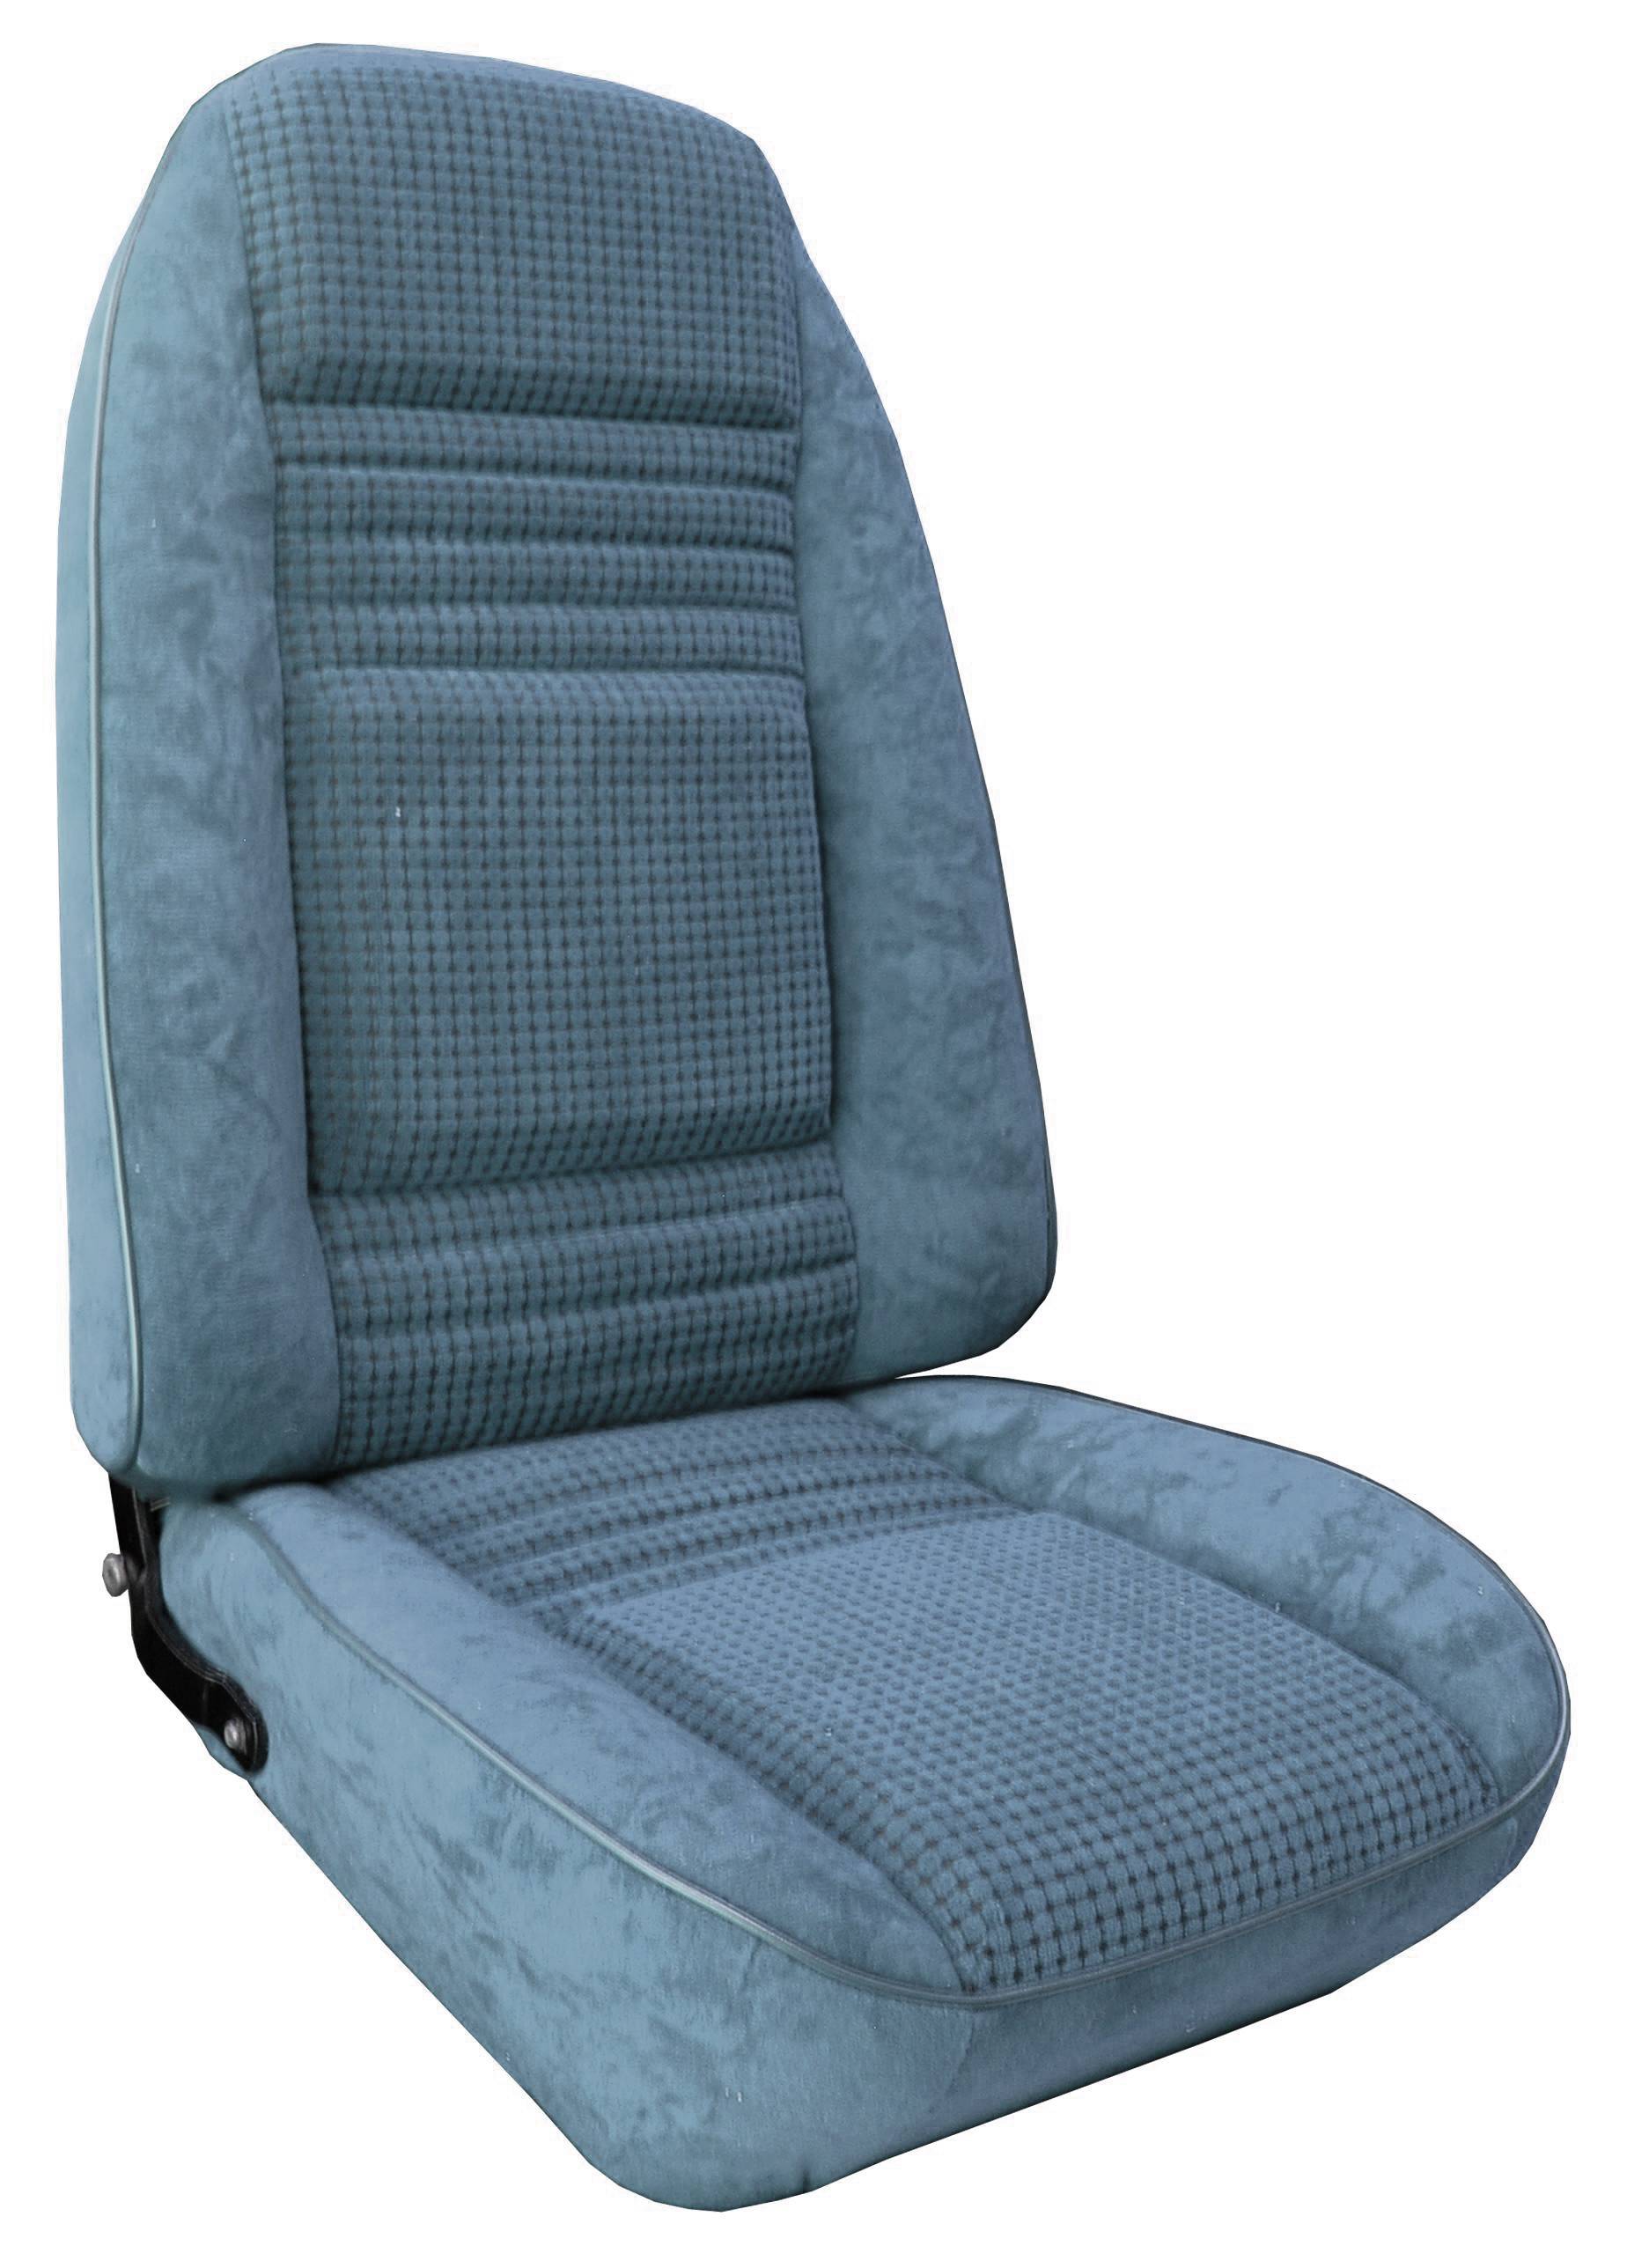 Upholstery Applications, Automotive Fabrics, Seat Covering Materials